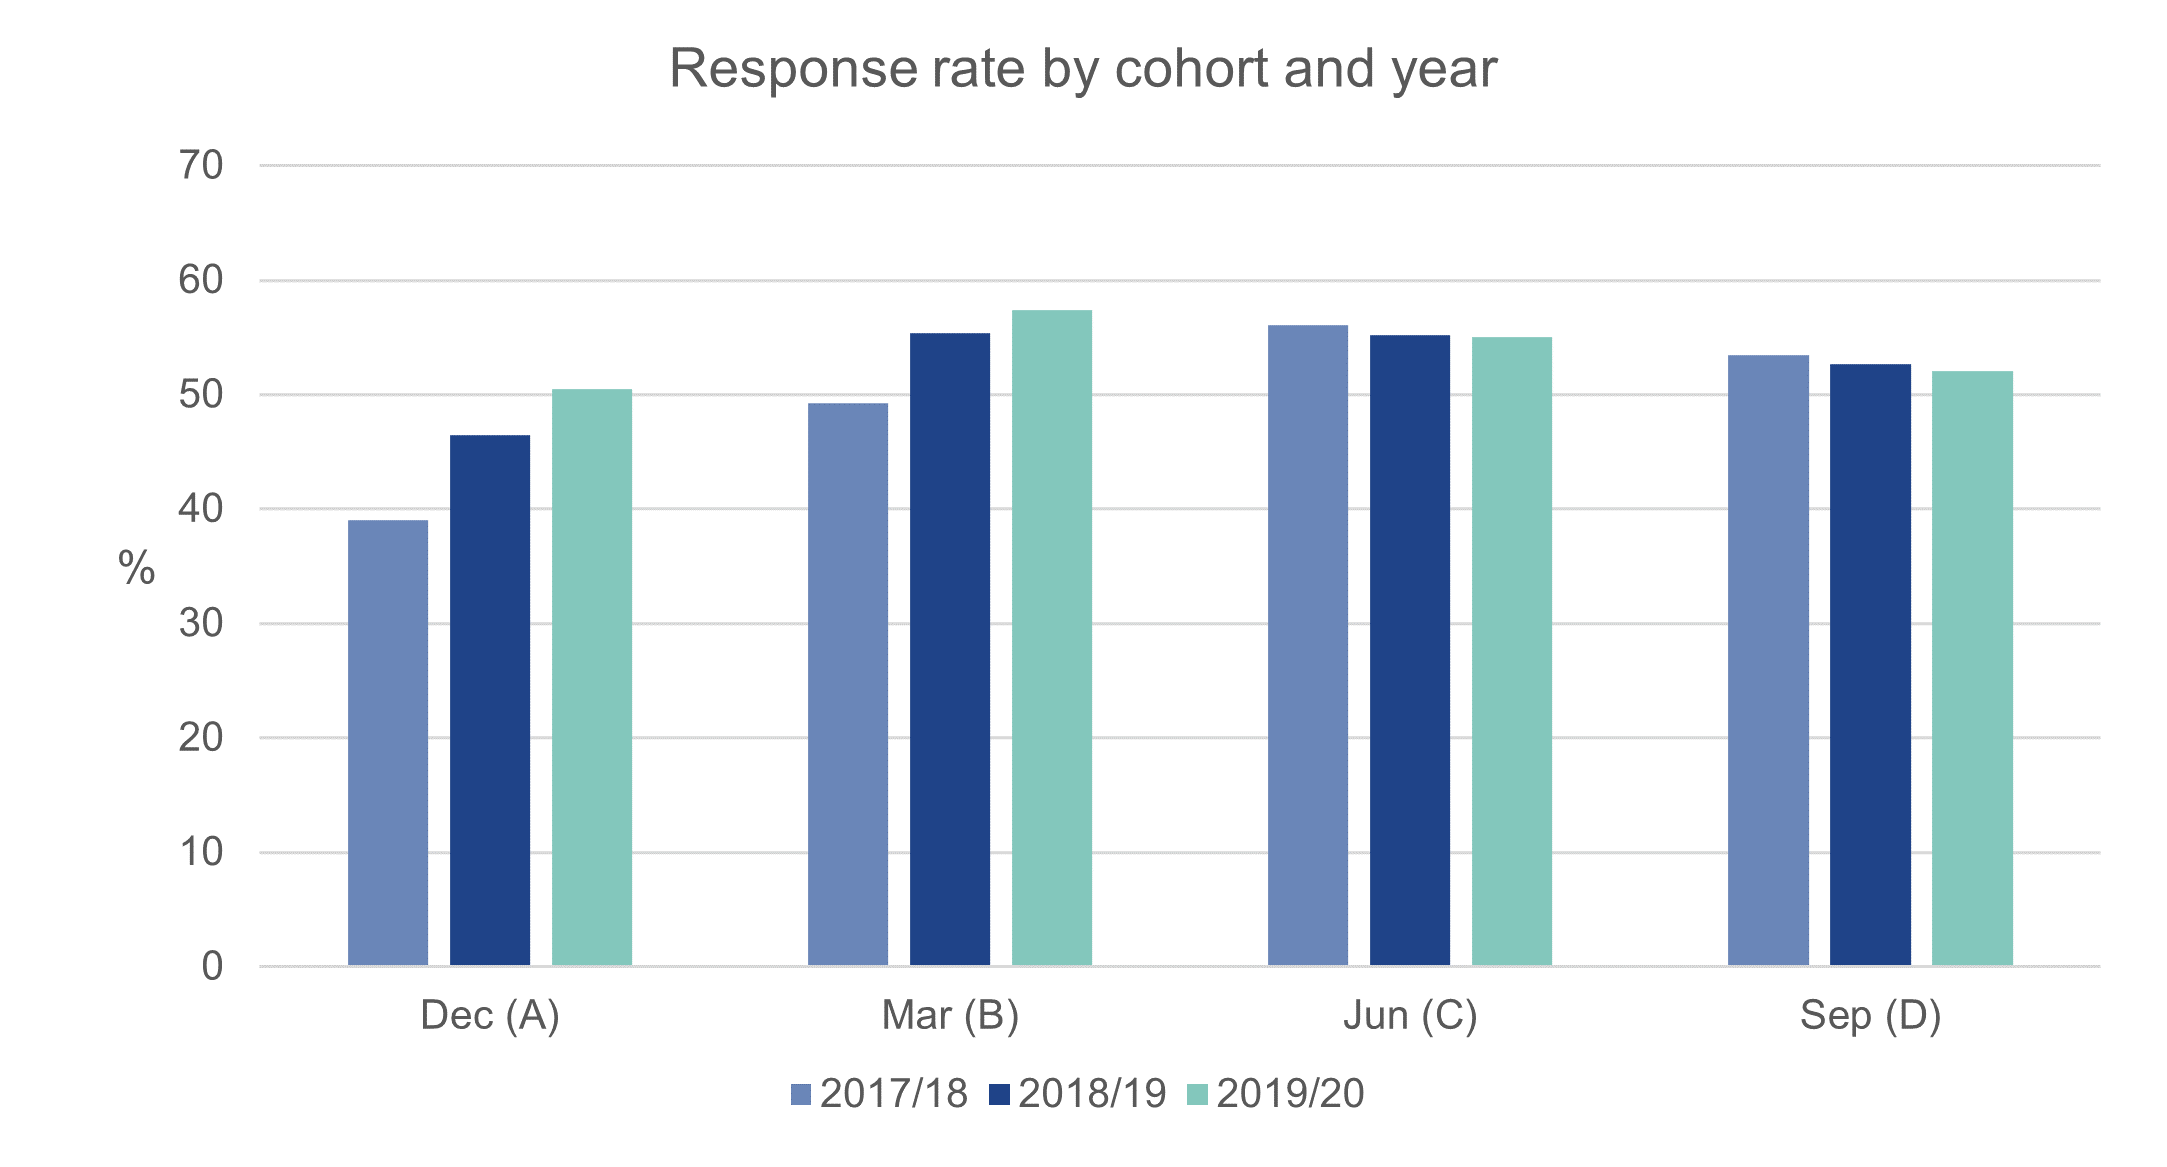 Response rates for Cohorts A and B increased annually from year 1 to year 3. Rates for Cohorts C and D reduced annually.